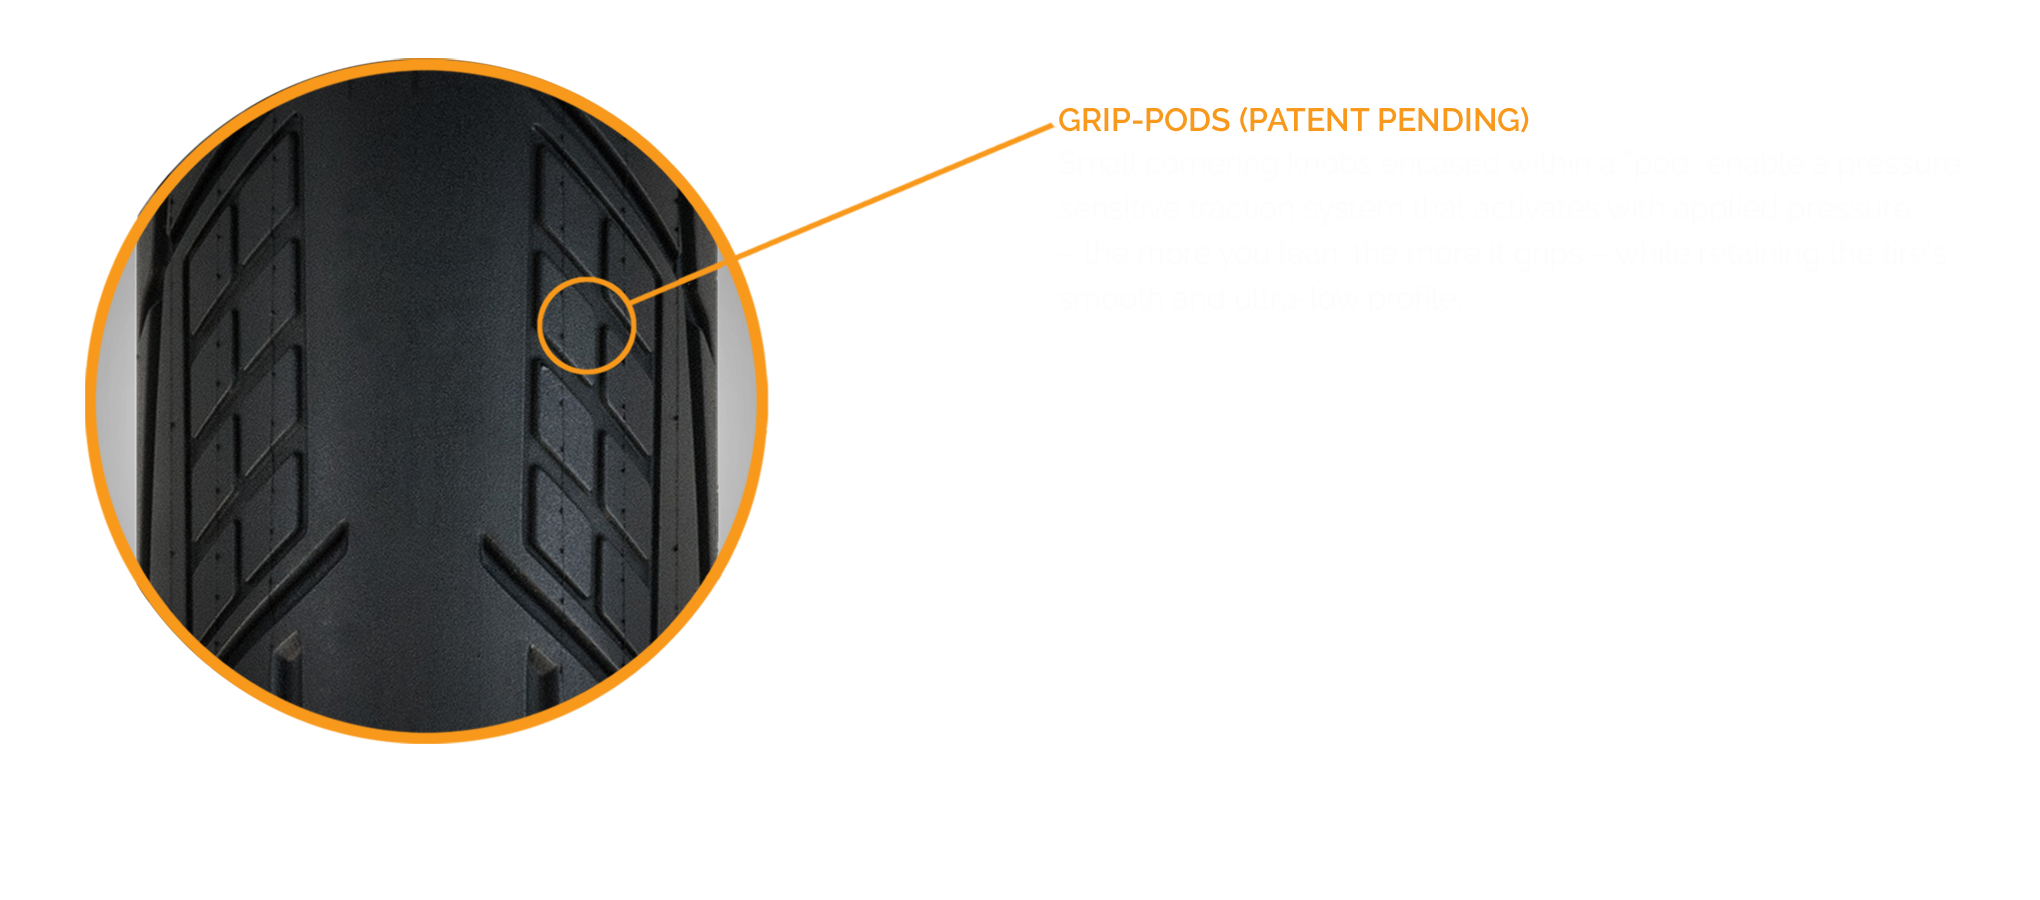 GRIP-PODS (Patent Pending) Small cornering knobs encased within a “pod” enable a pressure sensitive traction system that activates with applied pressure – the more you lean, the more it grips – while retaining the tire’s smooth and ultra-low profile. 